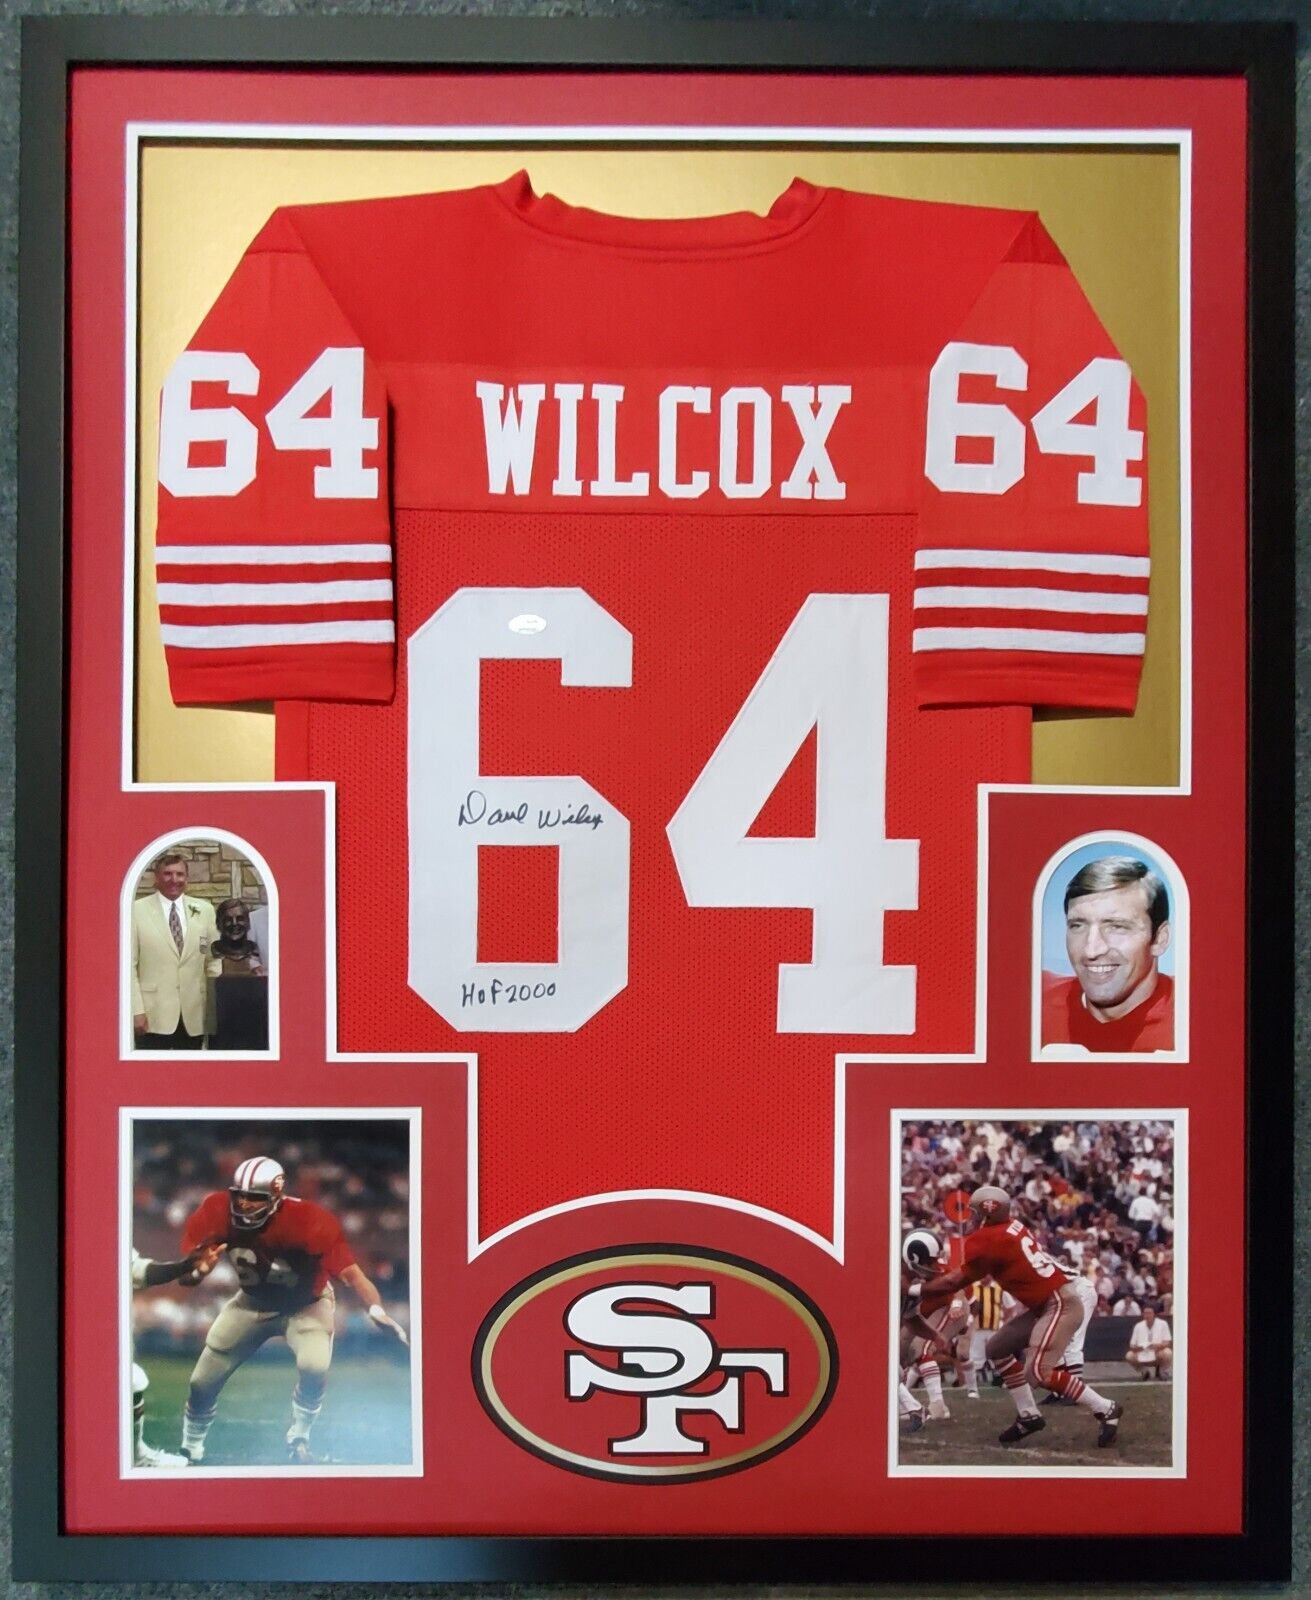 MVP Authentics Framed Dave Wilcox Autographed Signed Inscribed S.F. 49Ers Jersey Jsa Coa 382.50 sports jersey framing , jersey framing